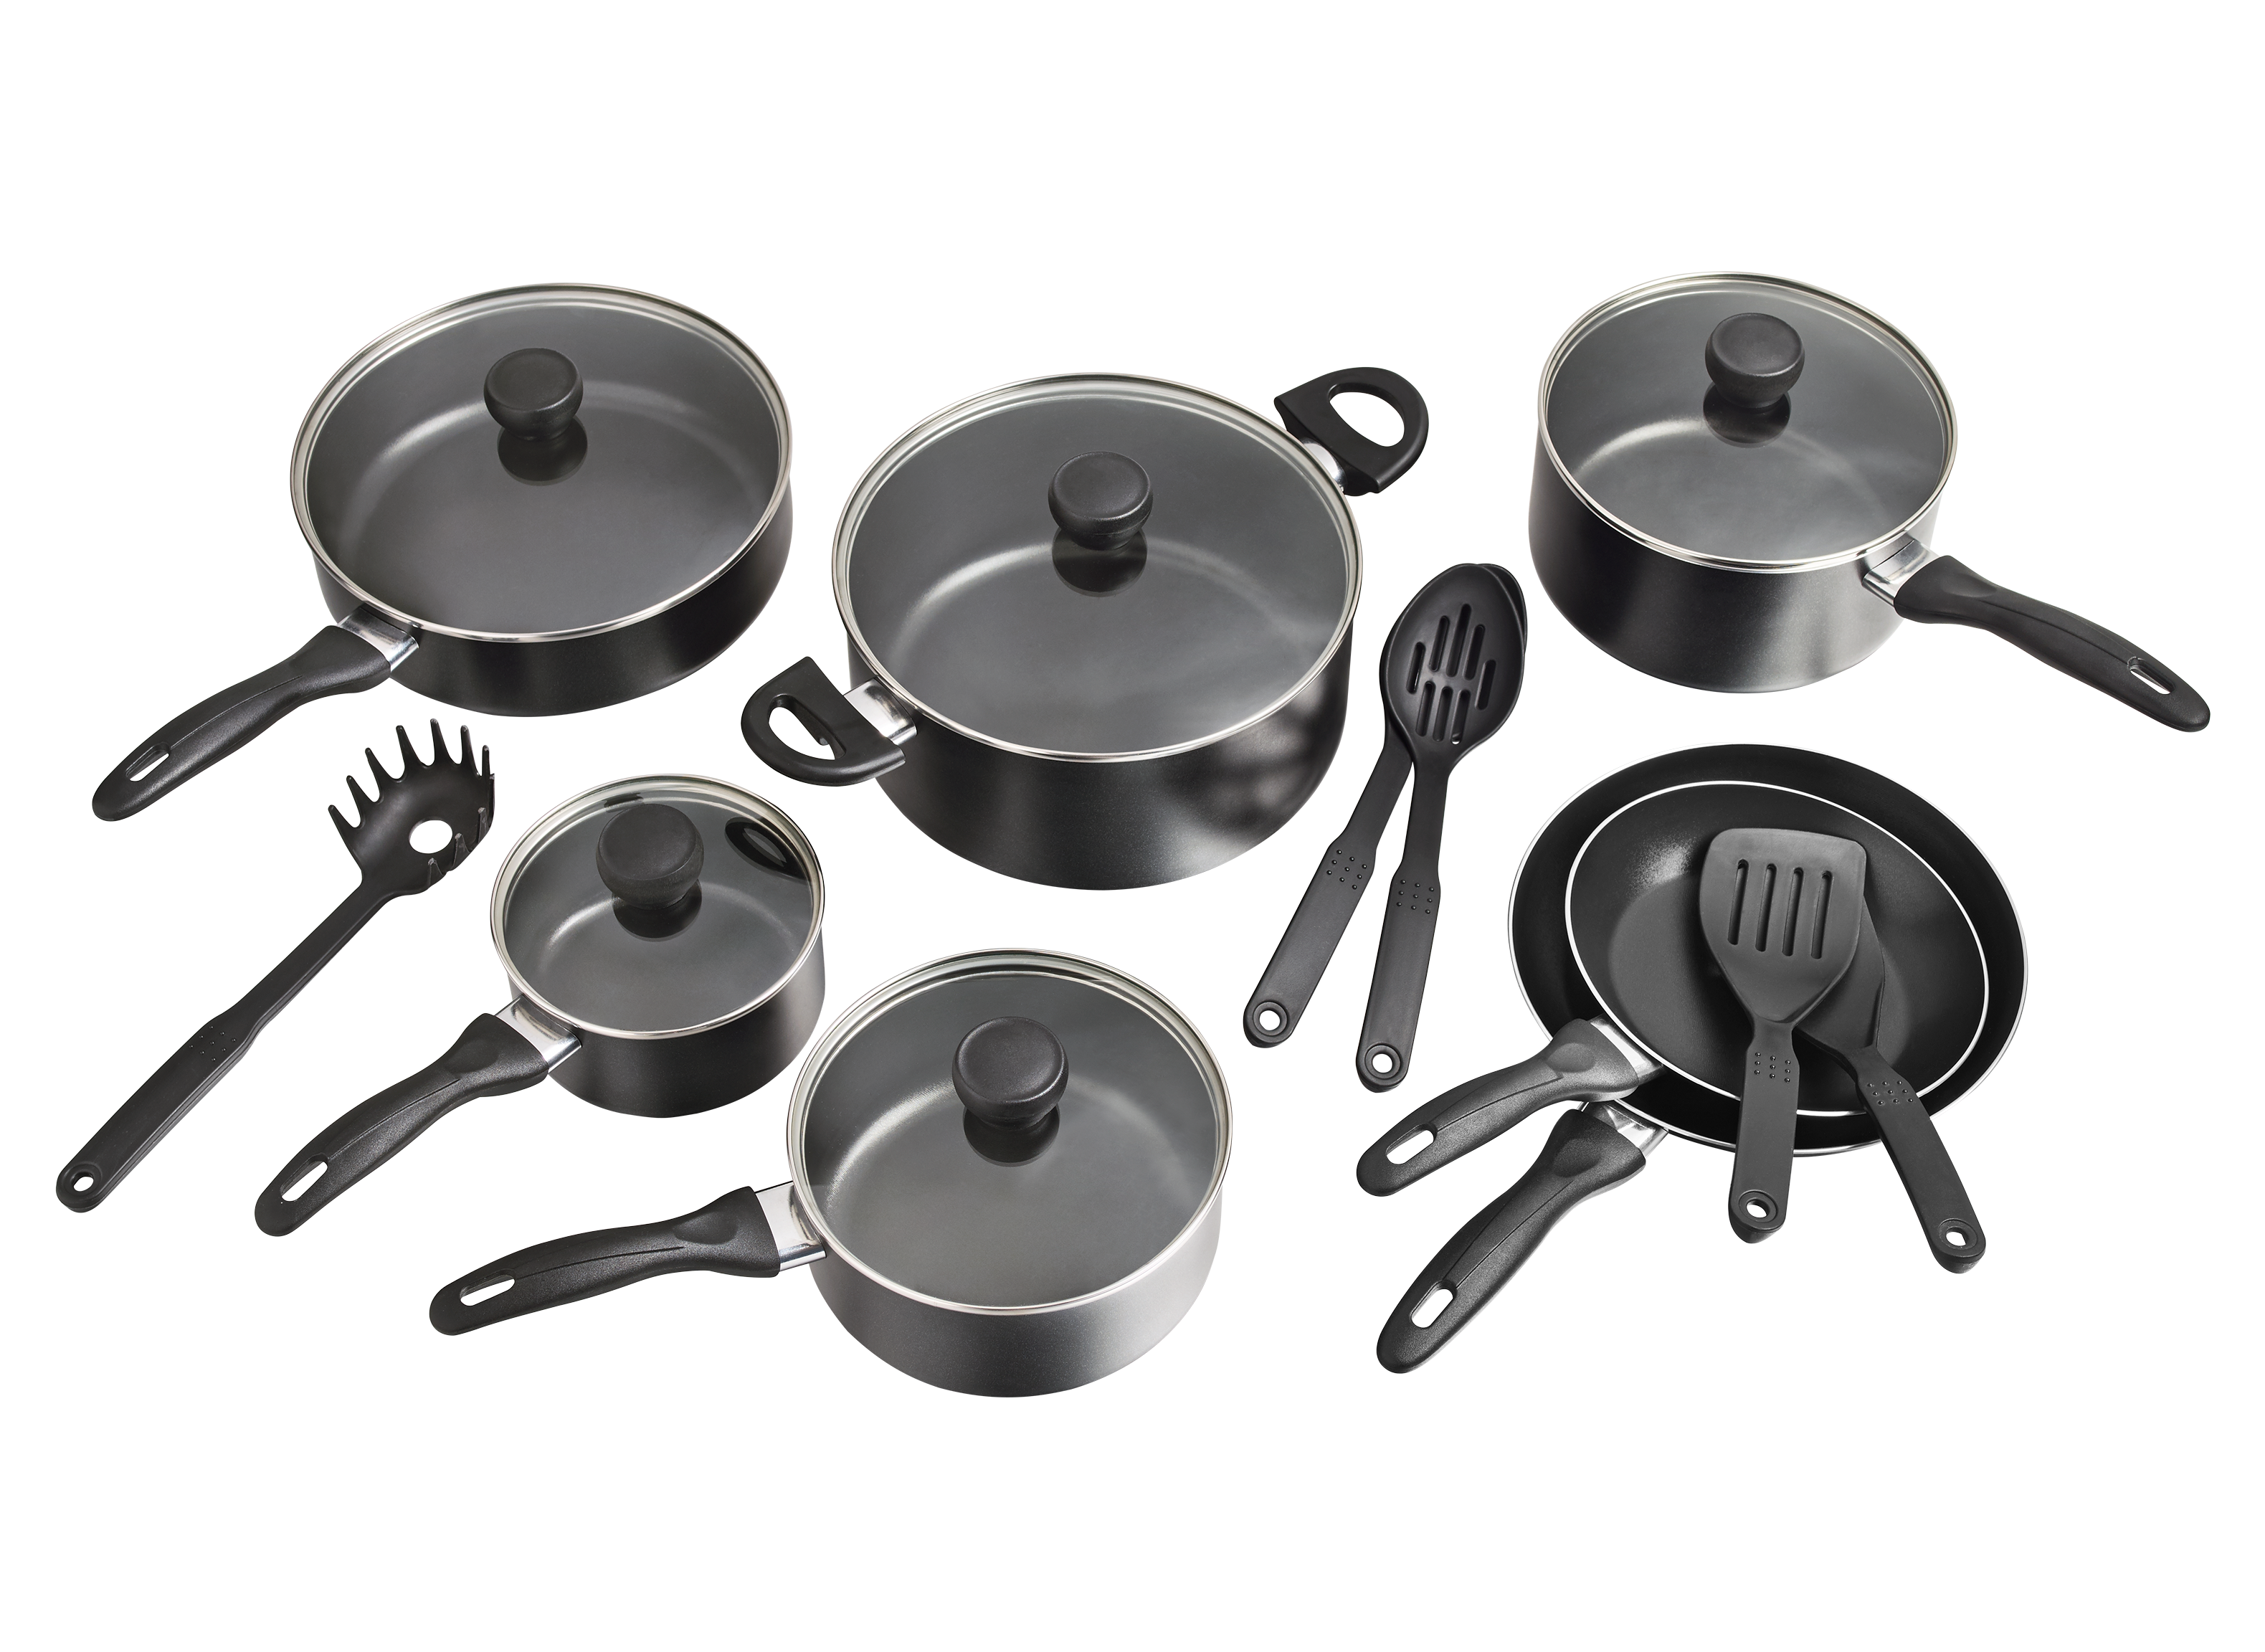 Tools of the Trade stainless steel cookware set review - Reviewed